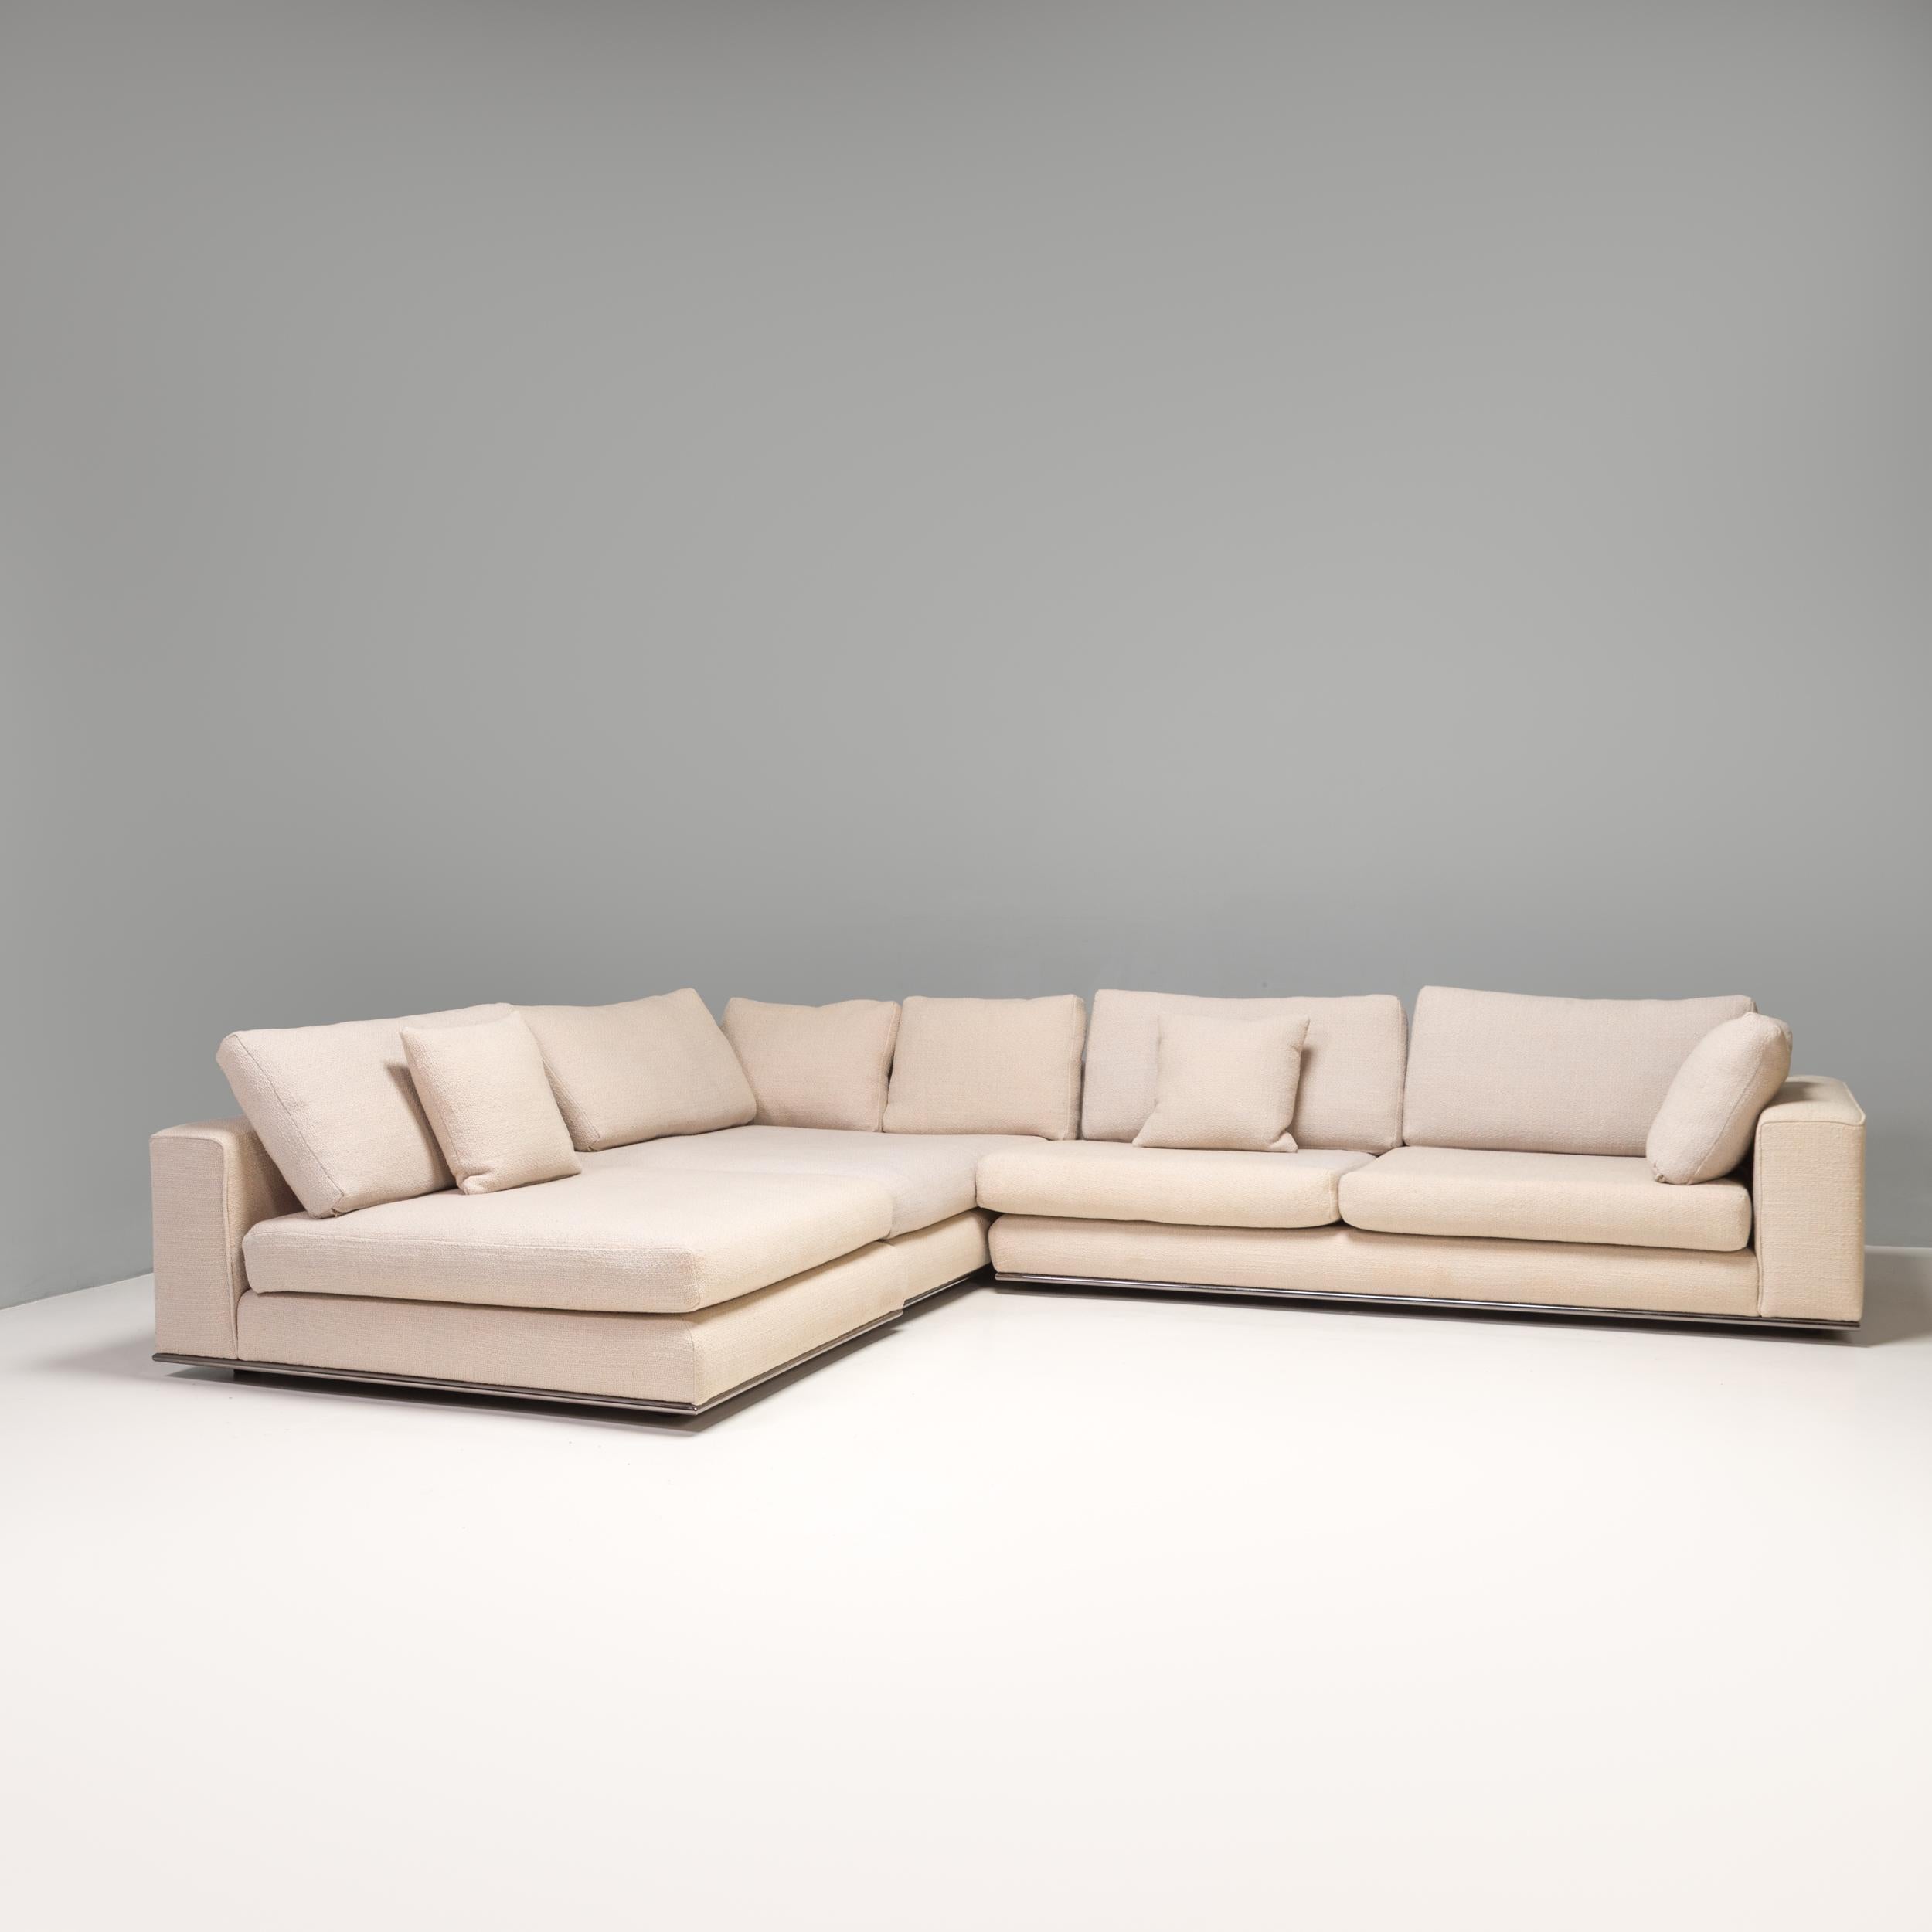 Designed by Rodolfo Dordoni for Minotti, the Andersen Line sofa formed part of the 2010 Senza Tempo Collection and embodies timeless Italian design.

Fully upholstered in beige textured wool linen boucle, the sofa has a modern linear silhouette